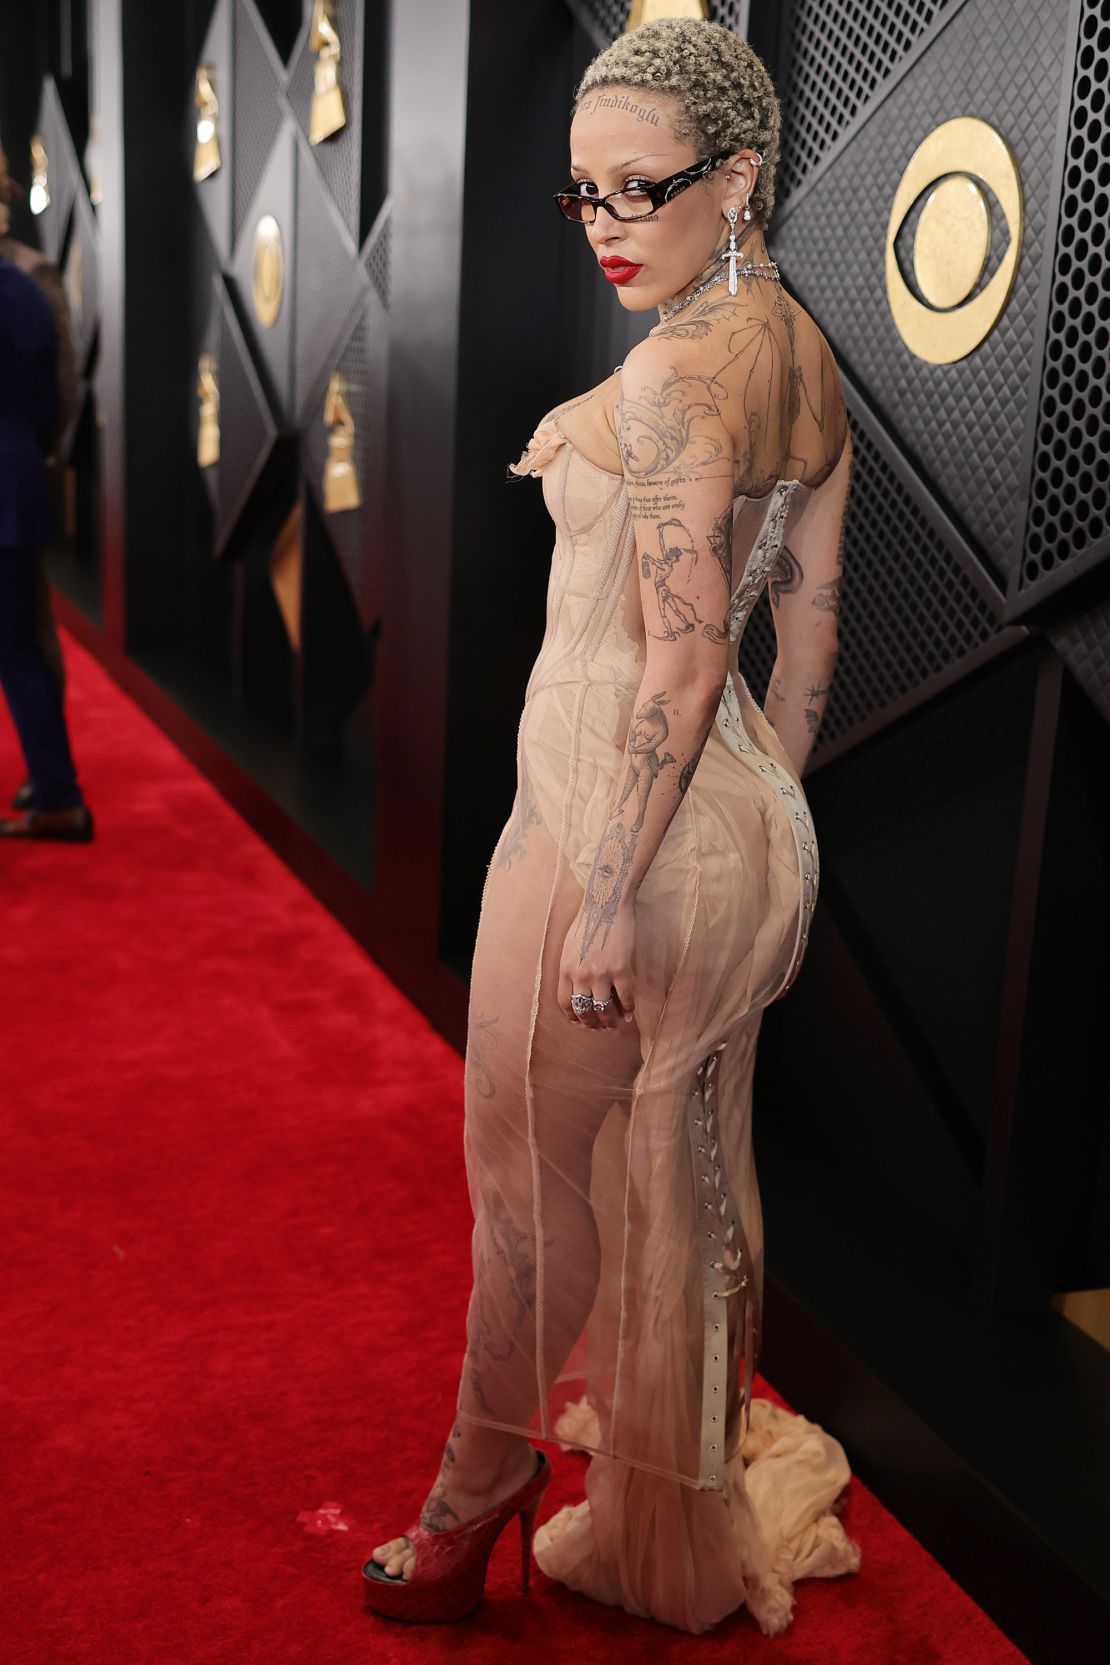 Doja Cat wore a structured barely-there sheer dress, by Turkish-British designer Dilara Findikoglu, and red peep-toe platform shoes.